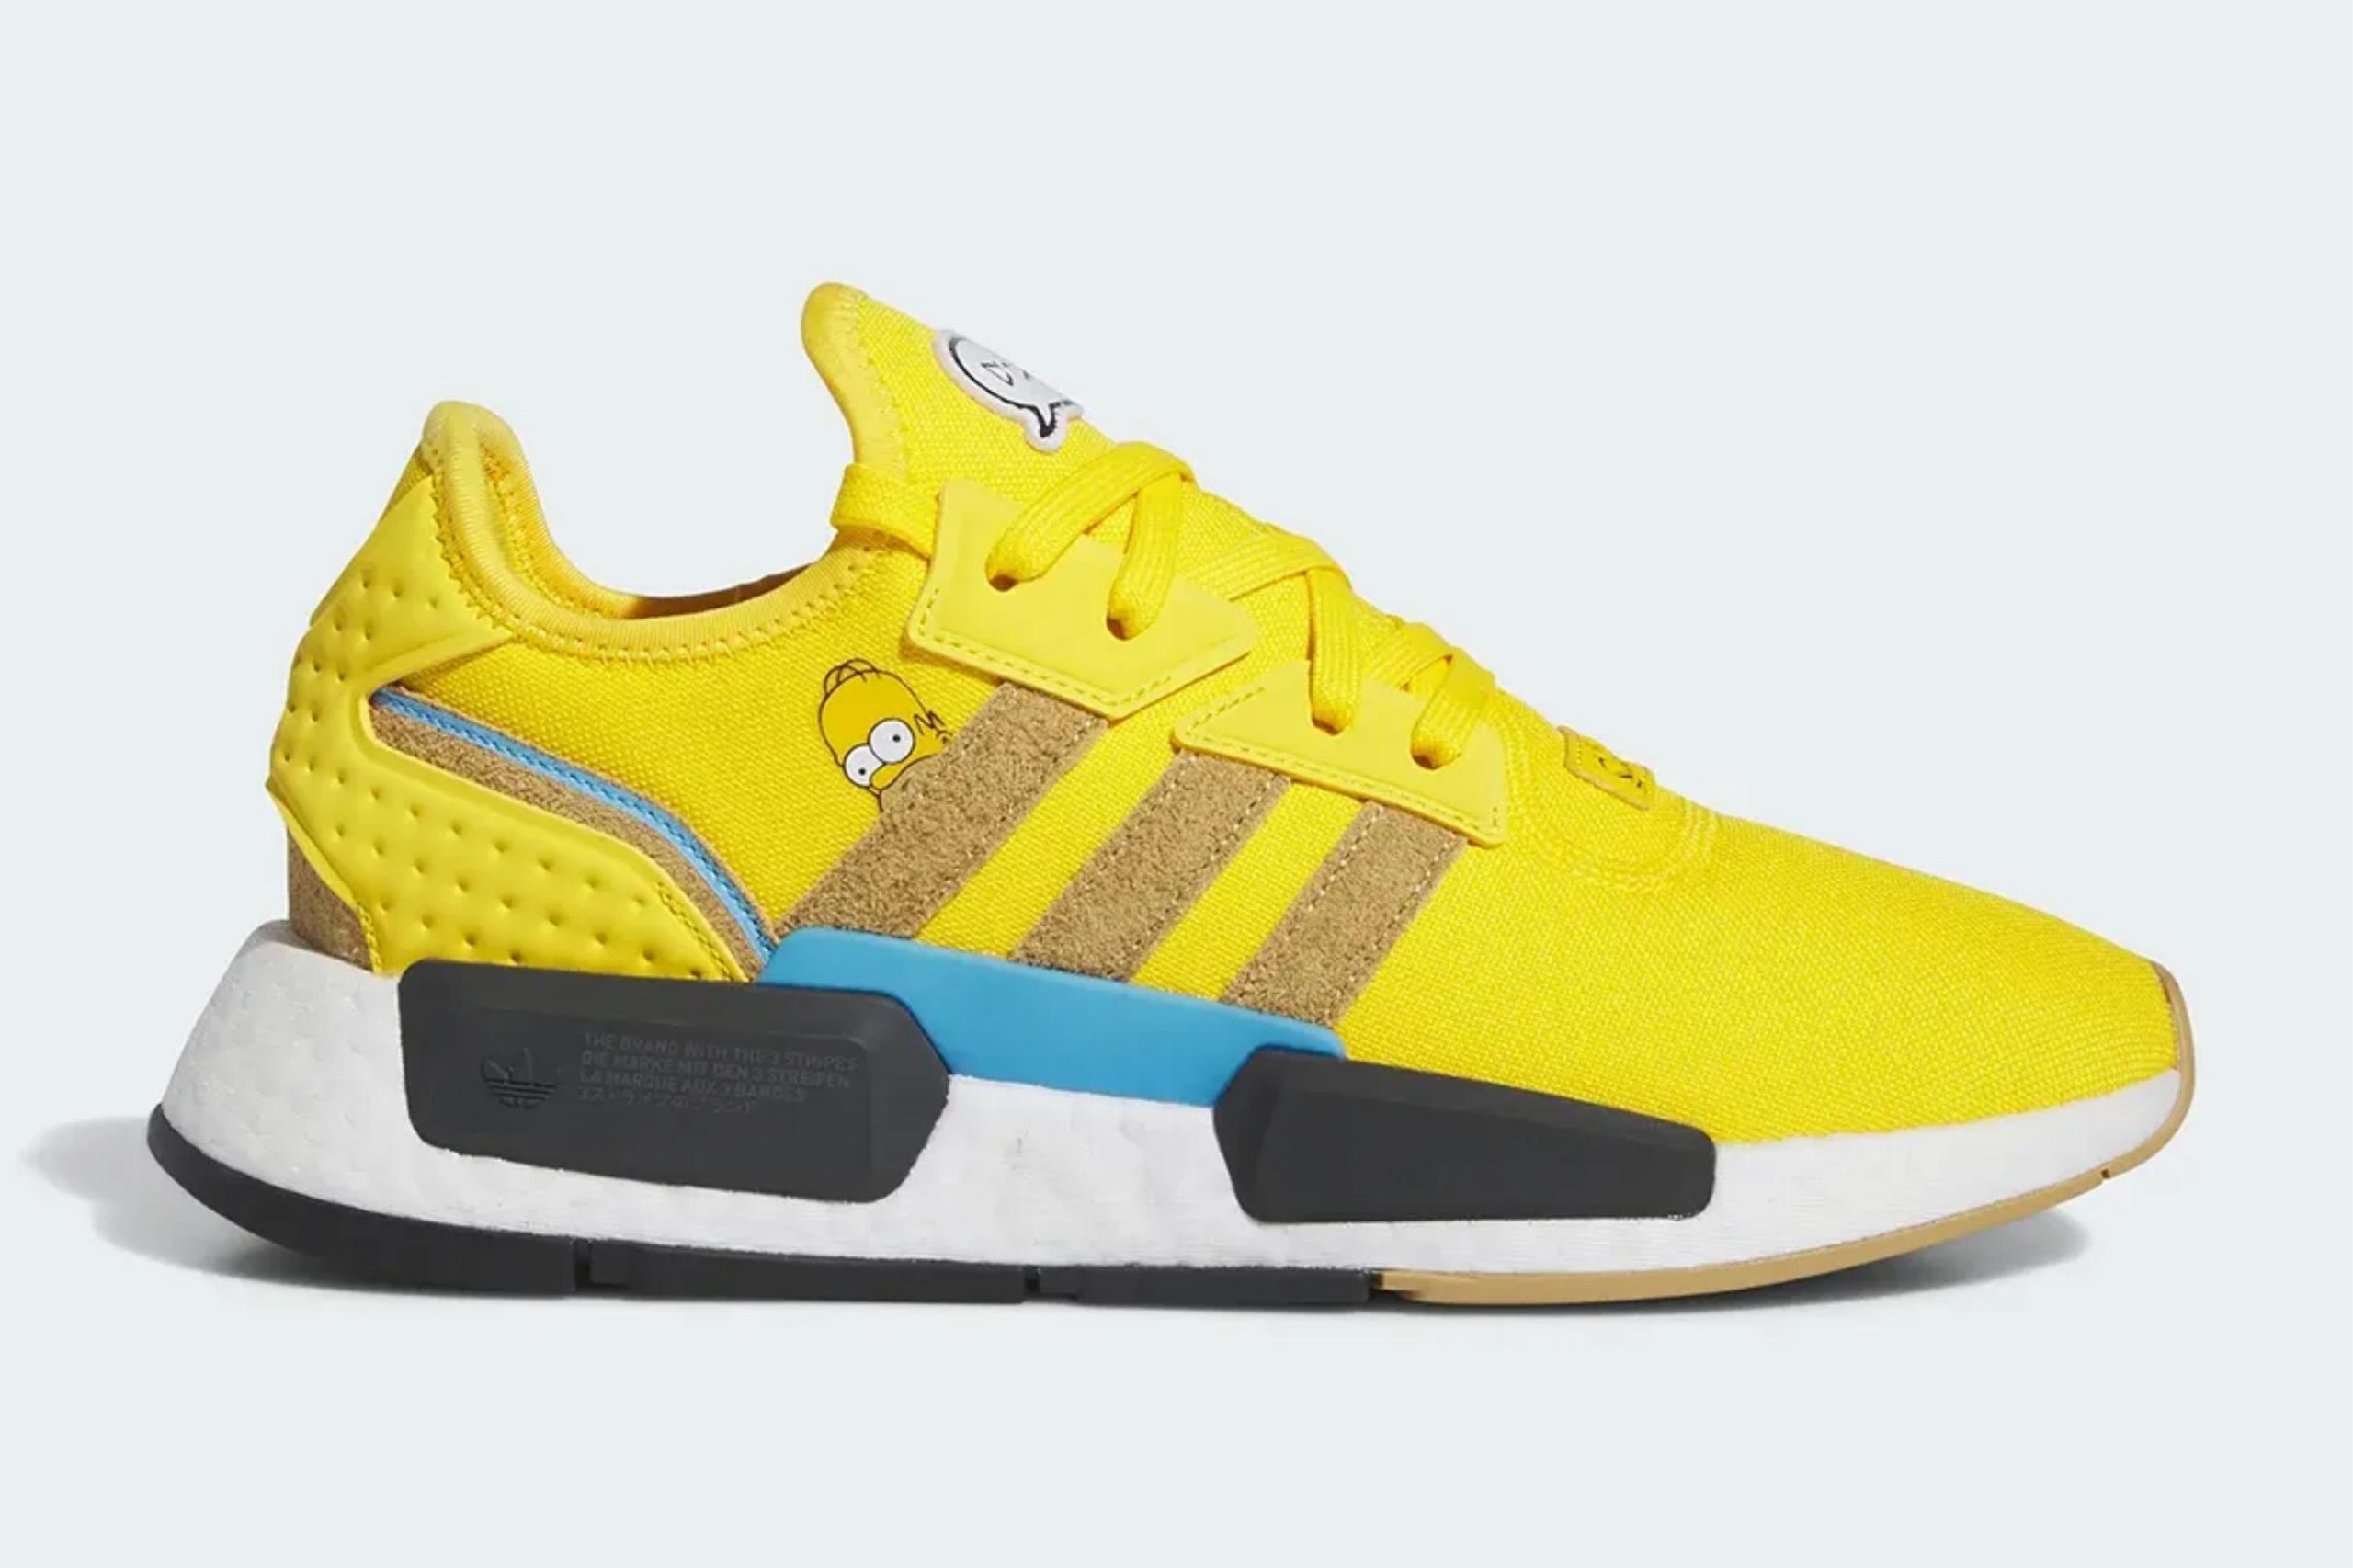 THE SIMPSONS X ADIDAS NMD G1 LOW "HOMER"